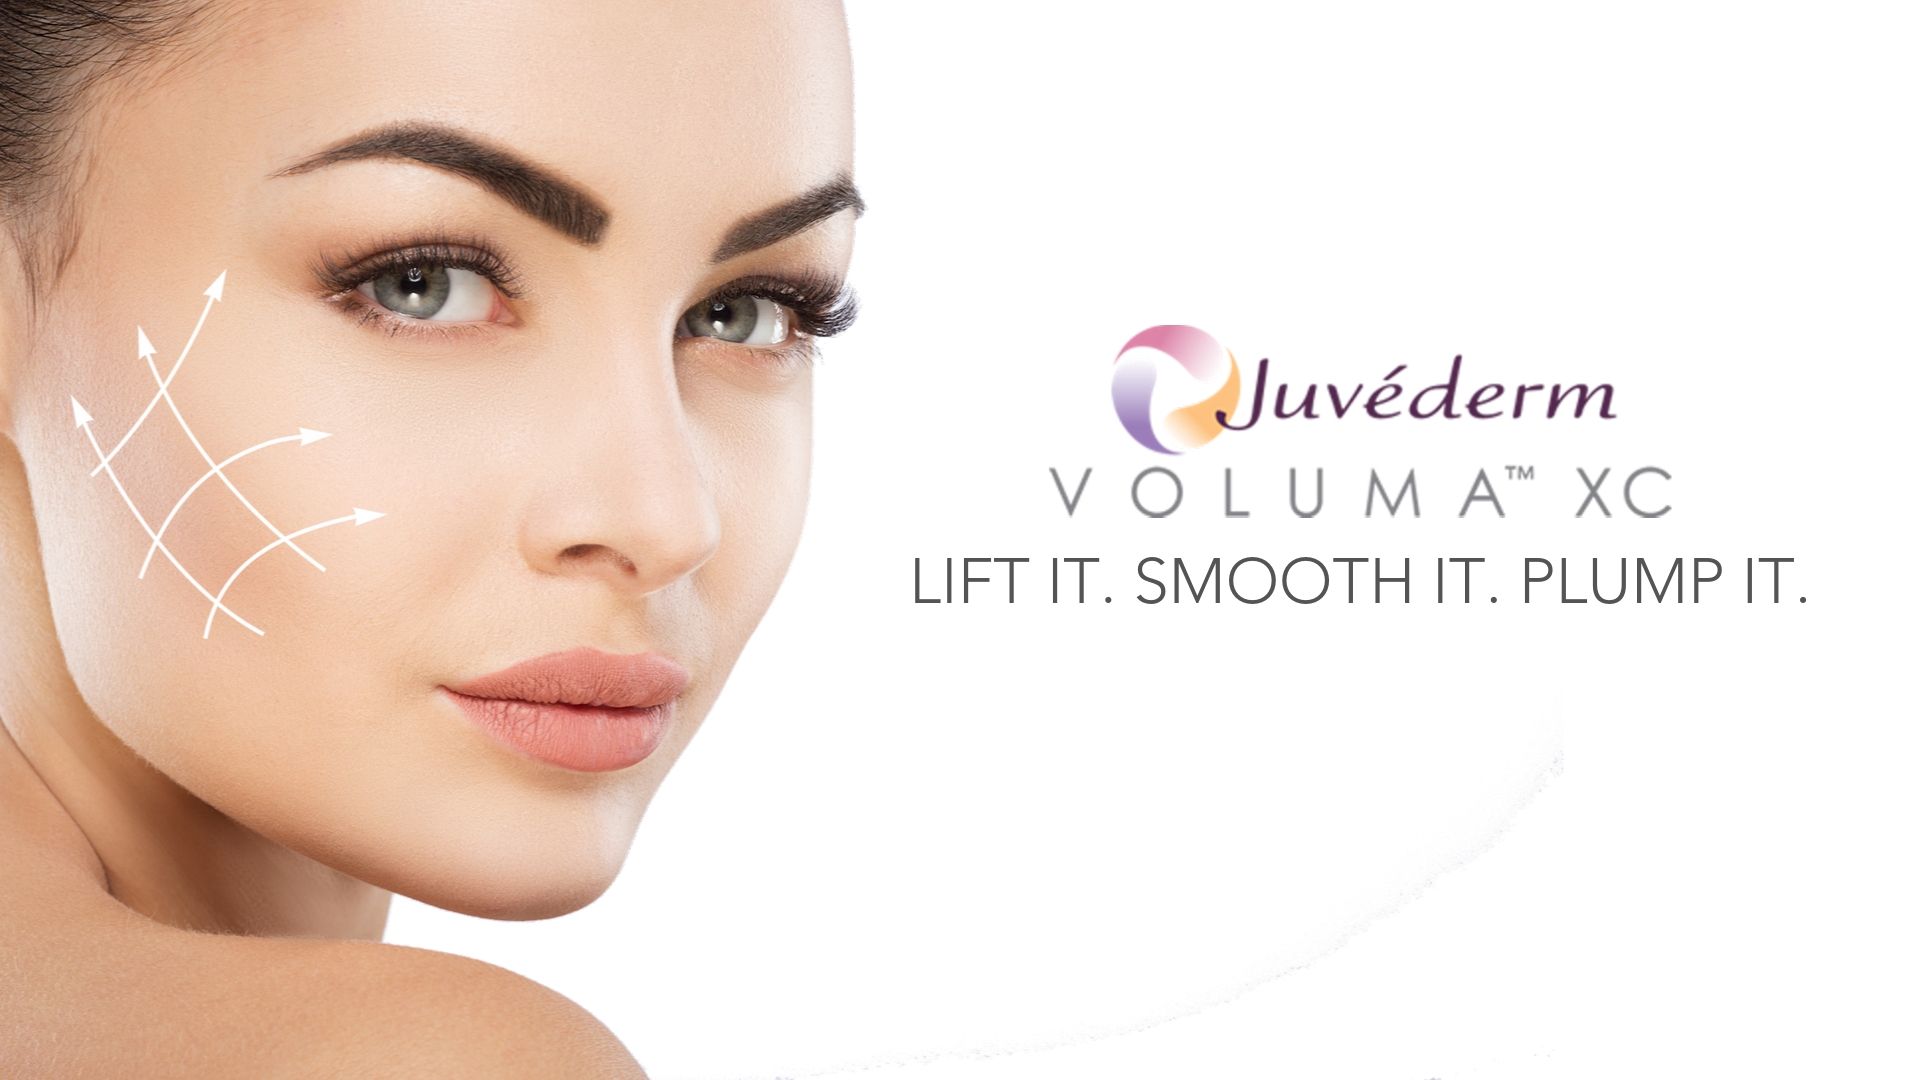 Woman with accentuated features from Juvederm treatment at shore medical aesthetics.